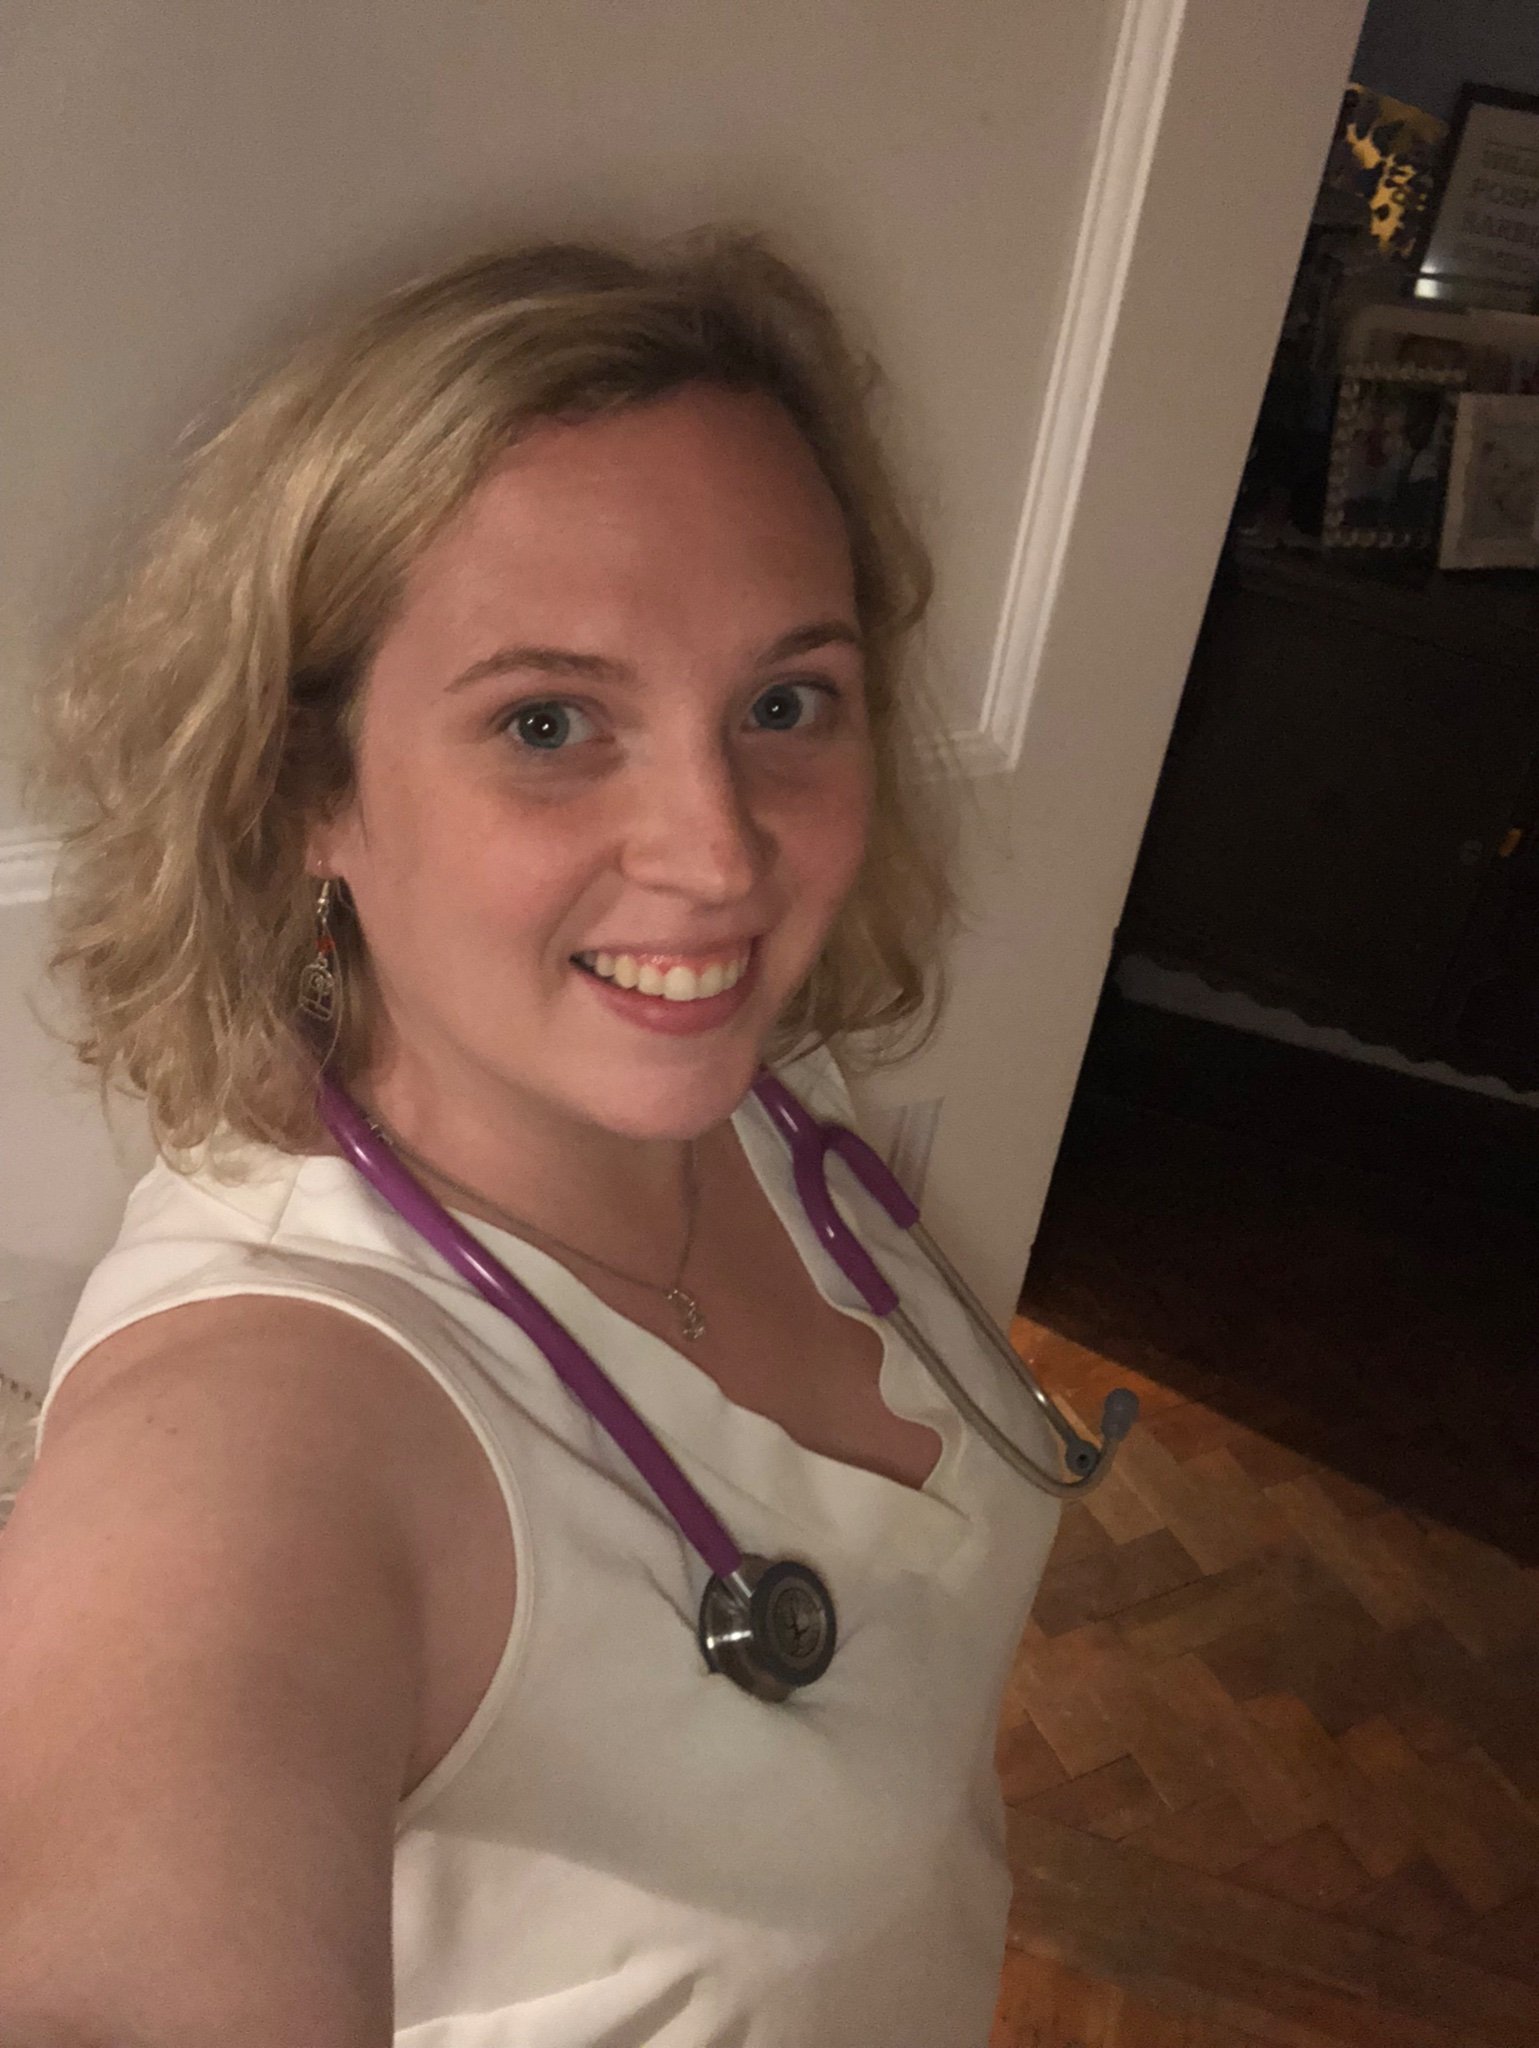 Views are my own | Proud mum | Radiographer of the Year 🏴󠁧󠁢󠁷󠁬󠁳󠁿 2019 |Advanced Clinical Practitioner Emergency Medicine | MHFAider